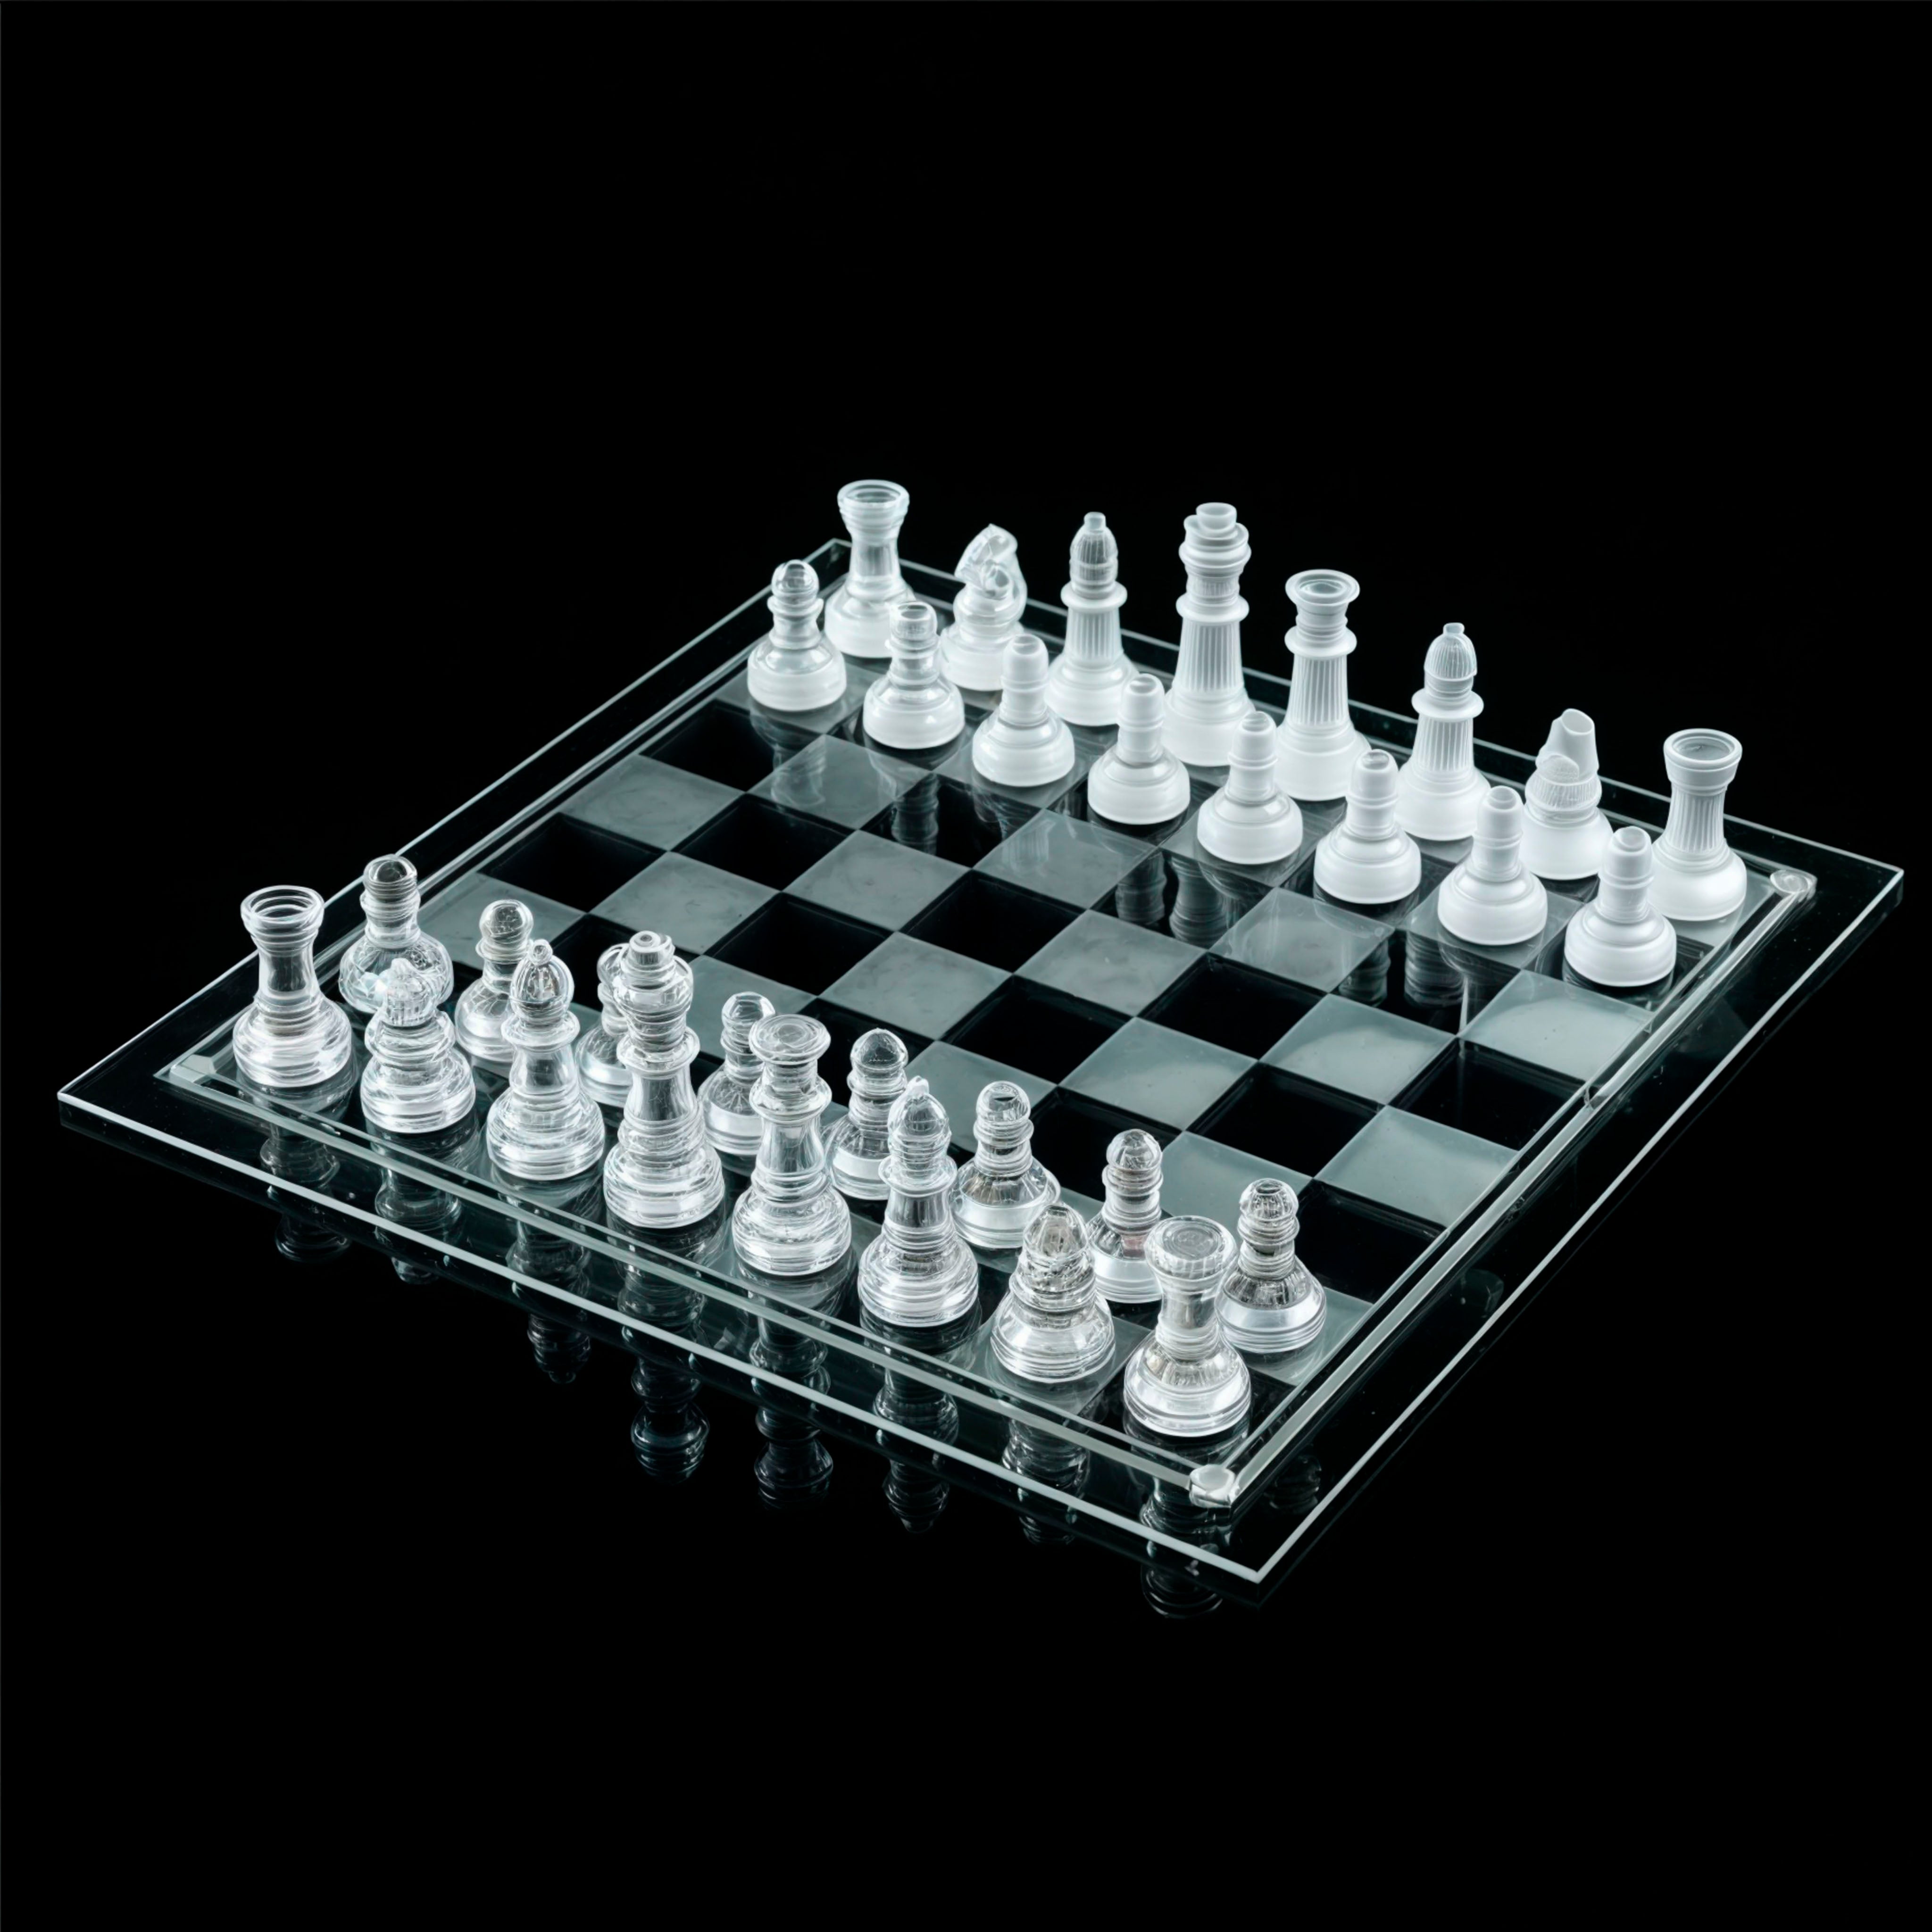 The Glass Chess